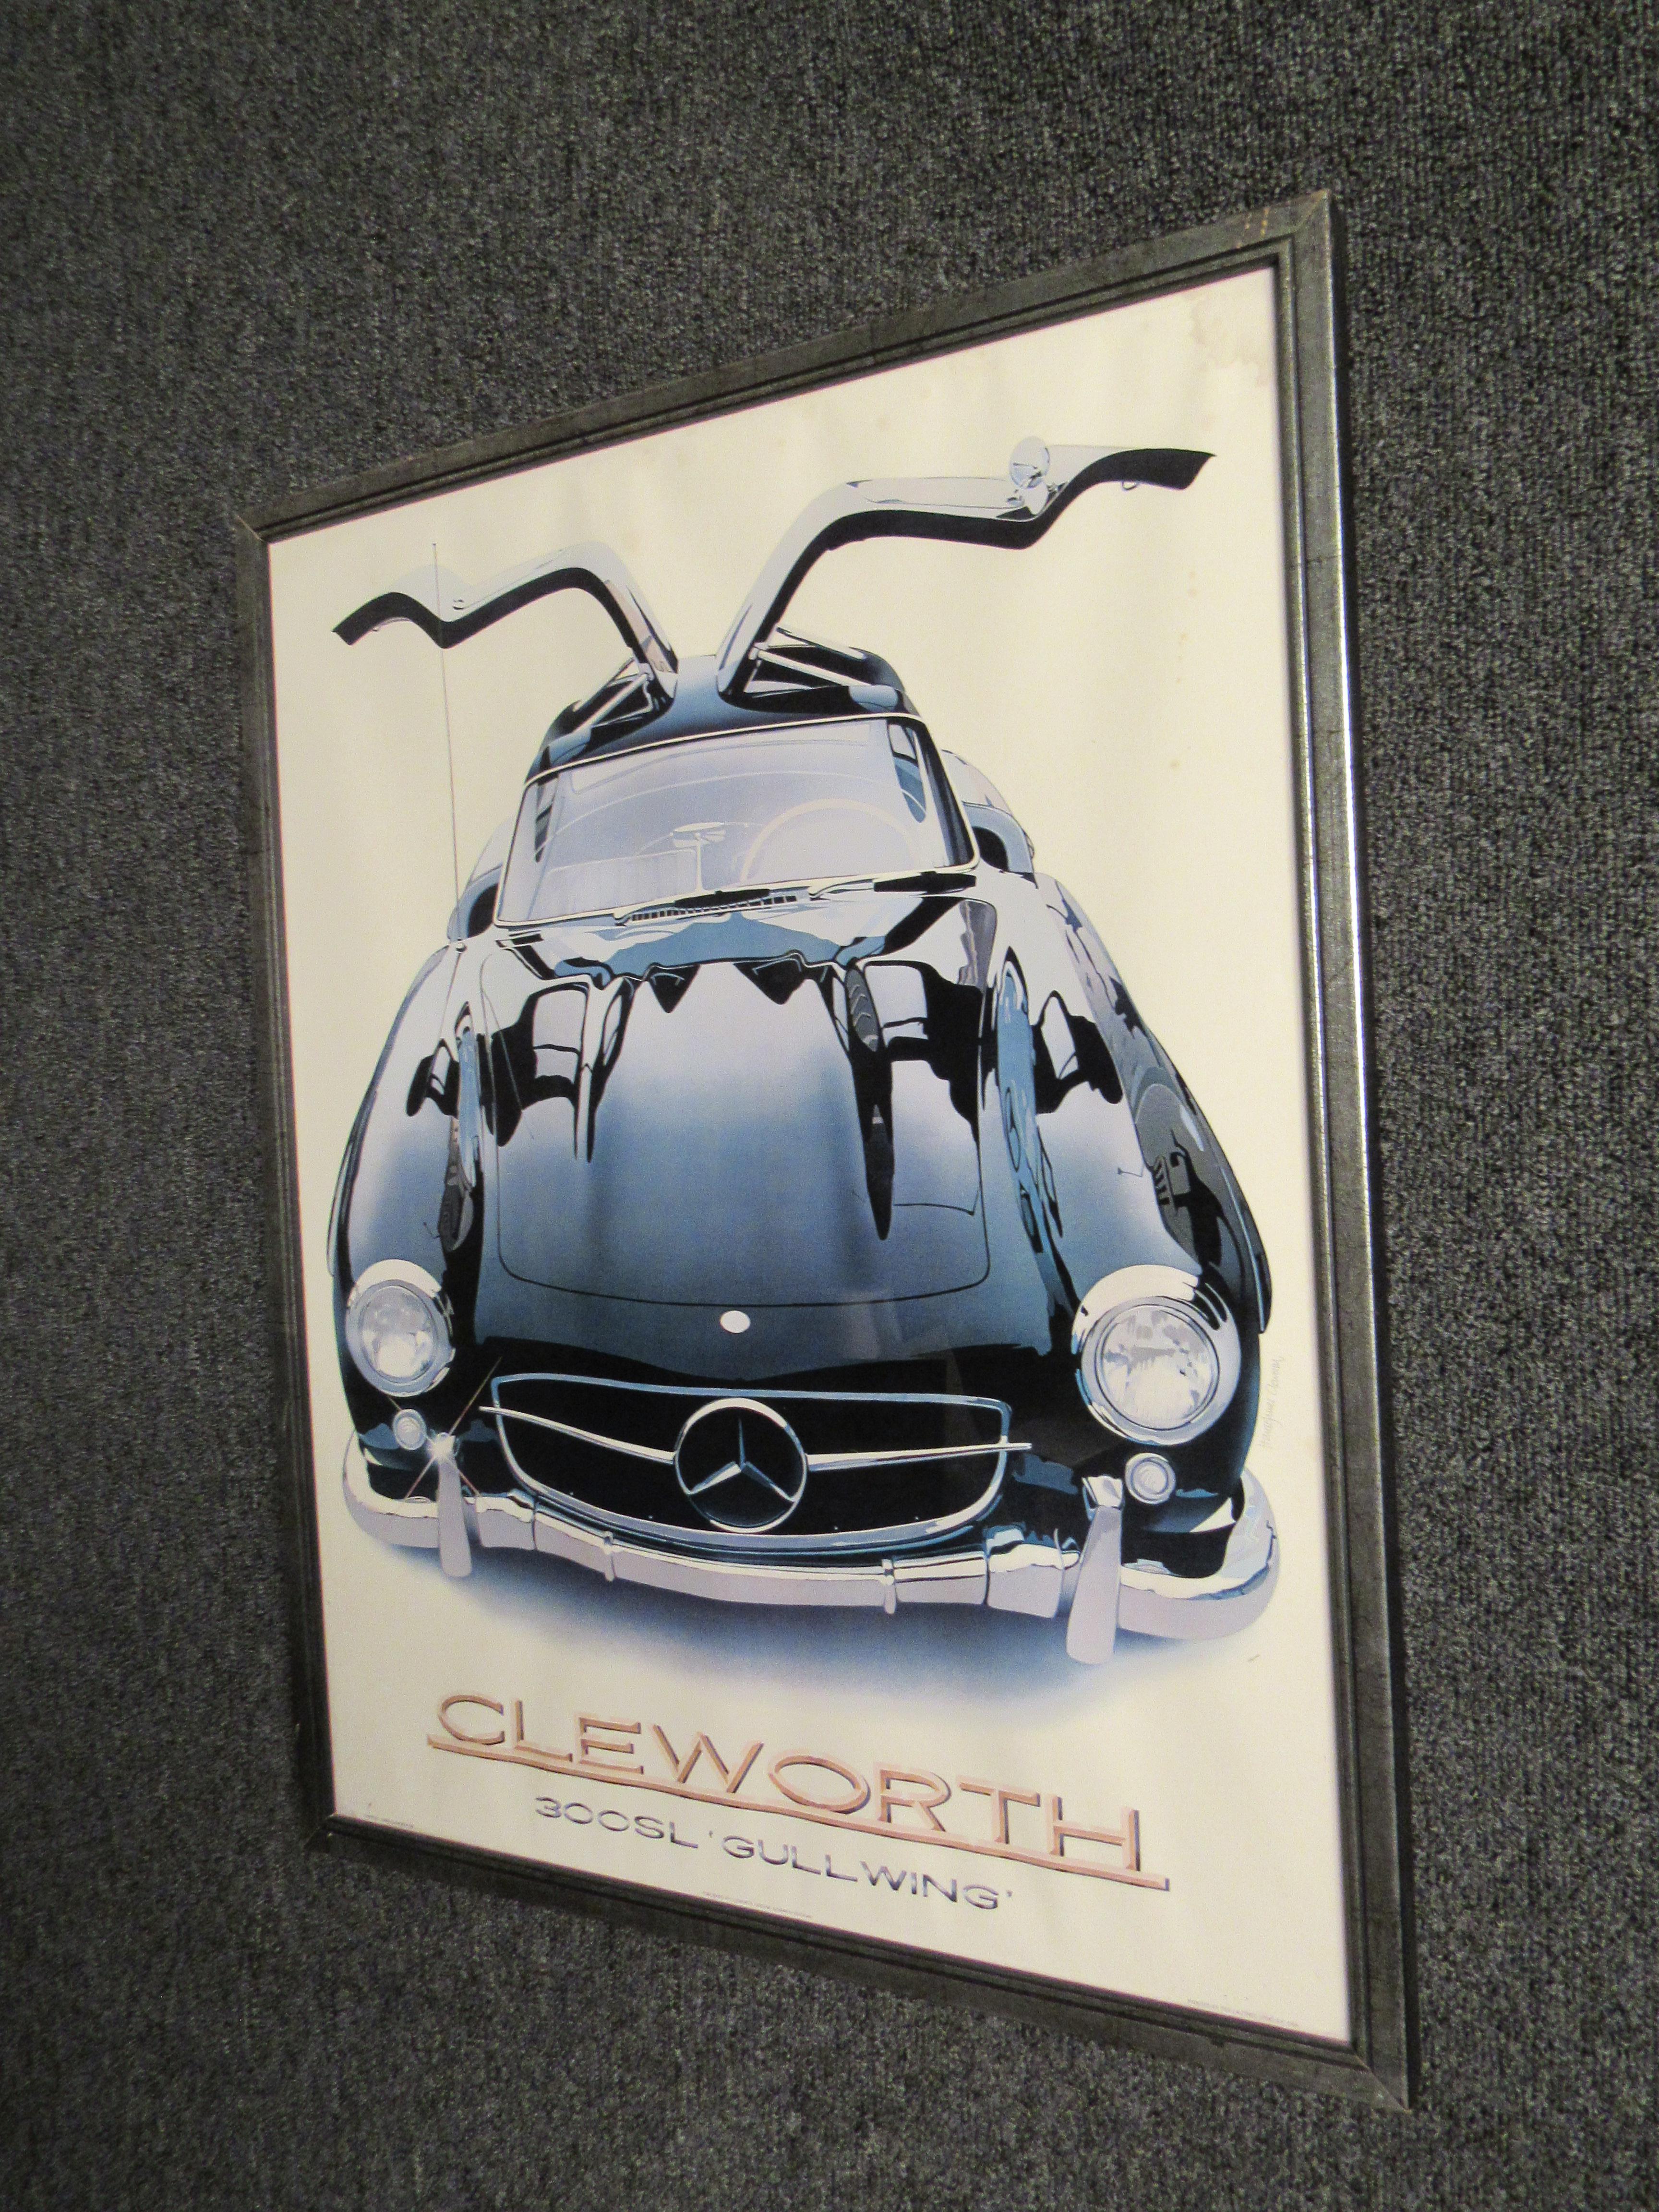 Modern Vintage Mercedes Benz Gullwing Lithograph by Harold James Chelworth For Sale